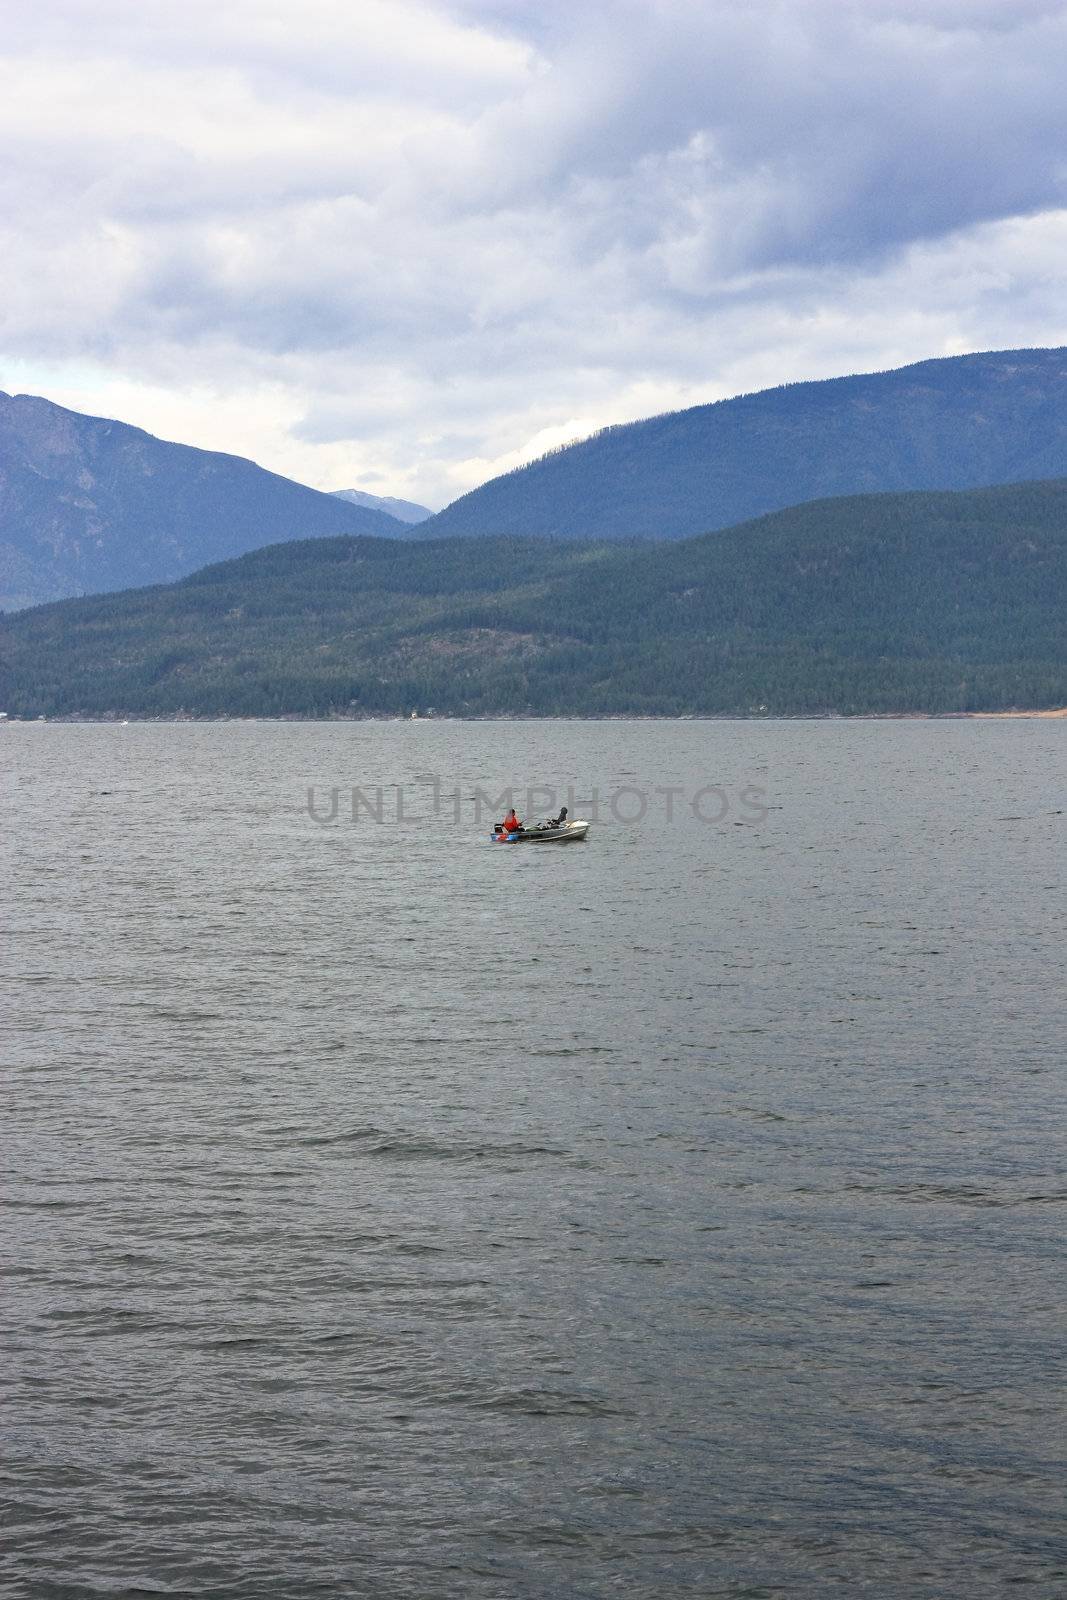 two men in a boat in the middle of the lake